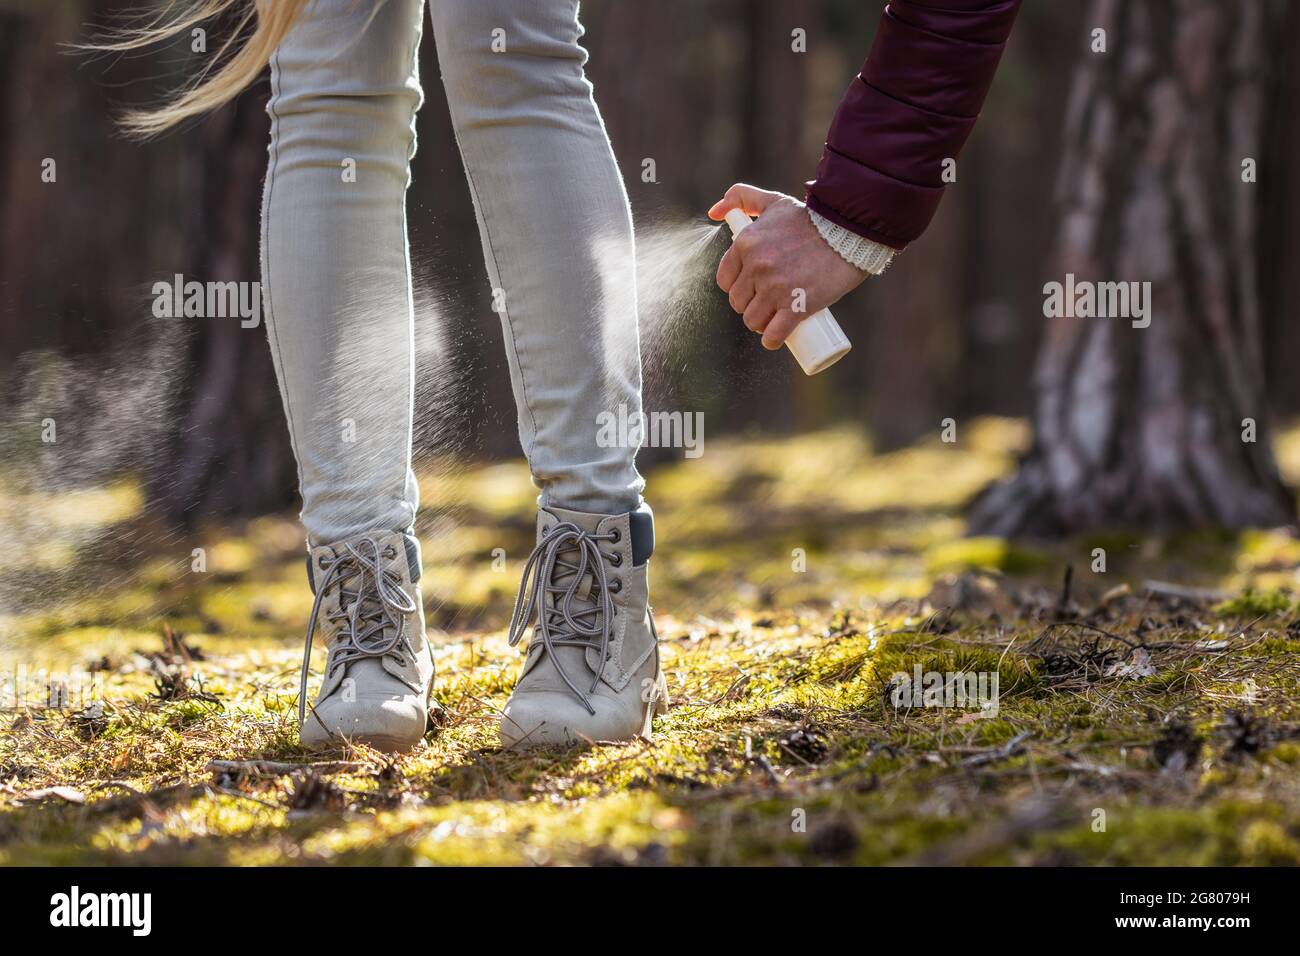 Woman spraying insect repellent against tick at her legs. Protection against mosquito bite during hike in forest Stock Photo